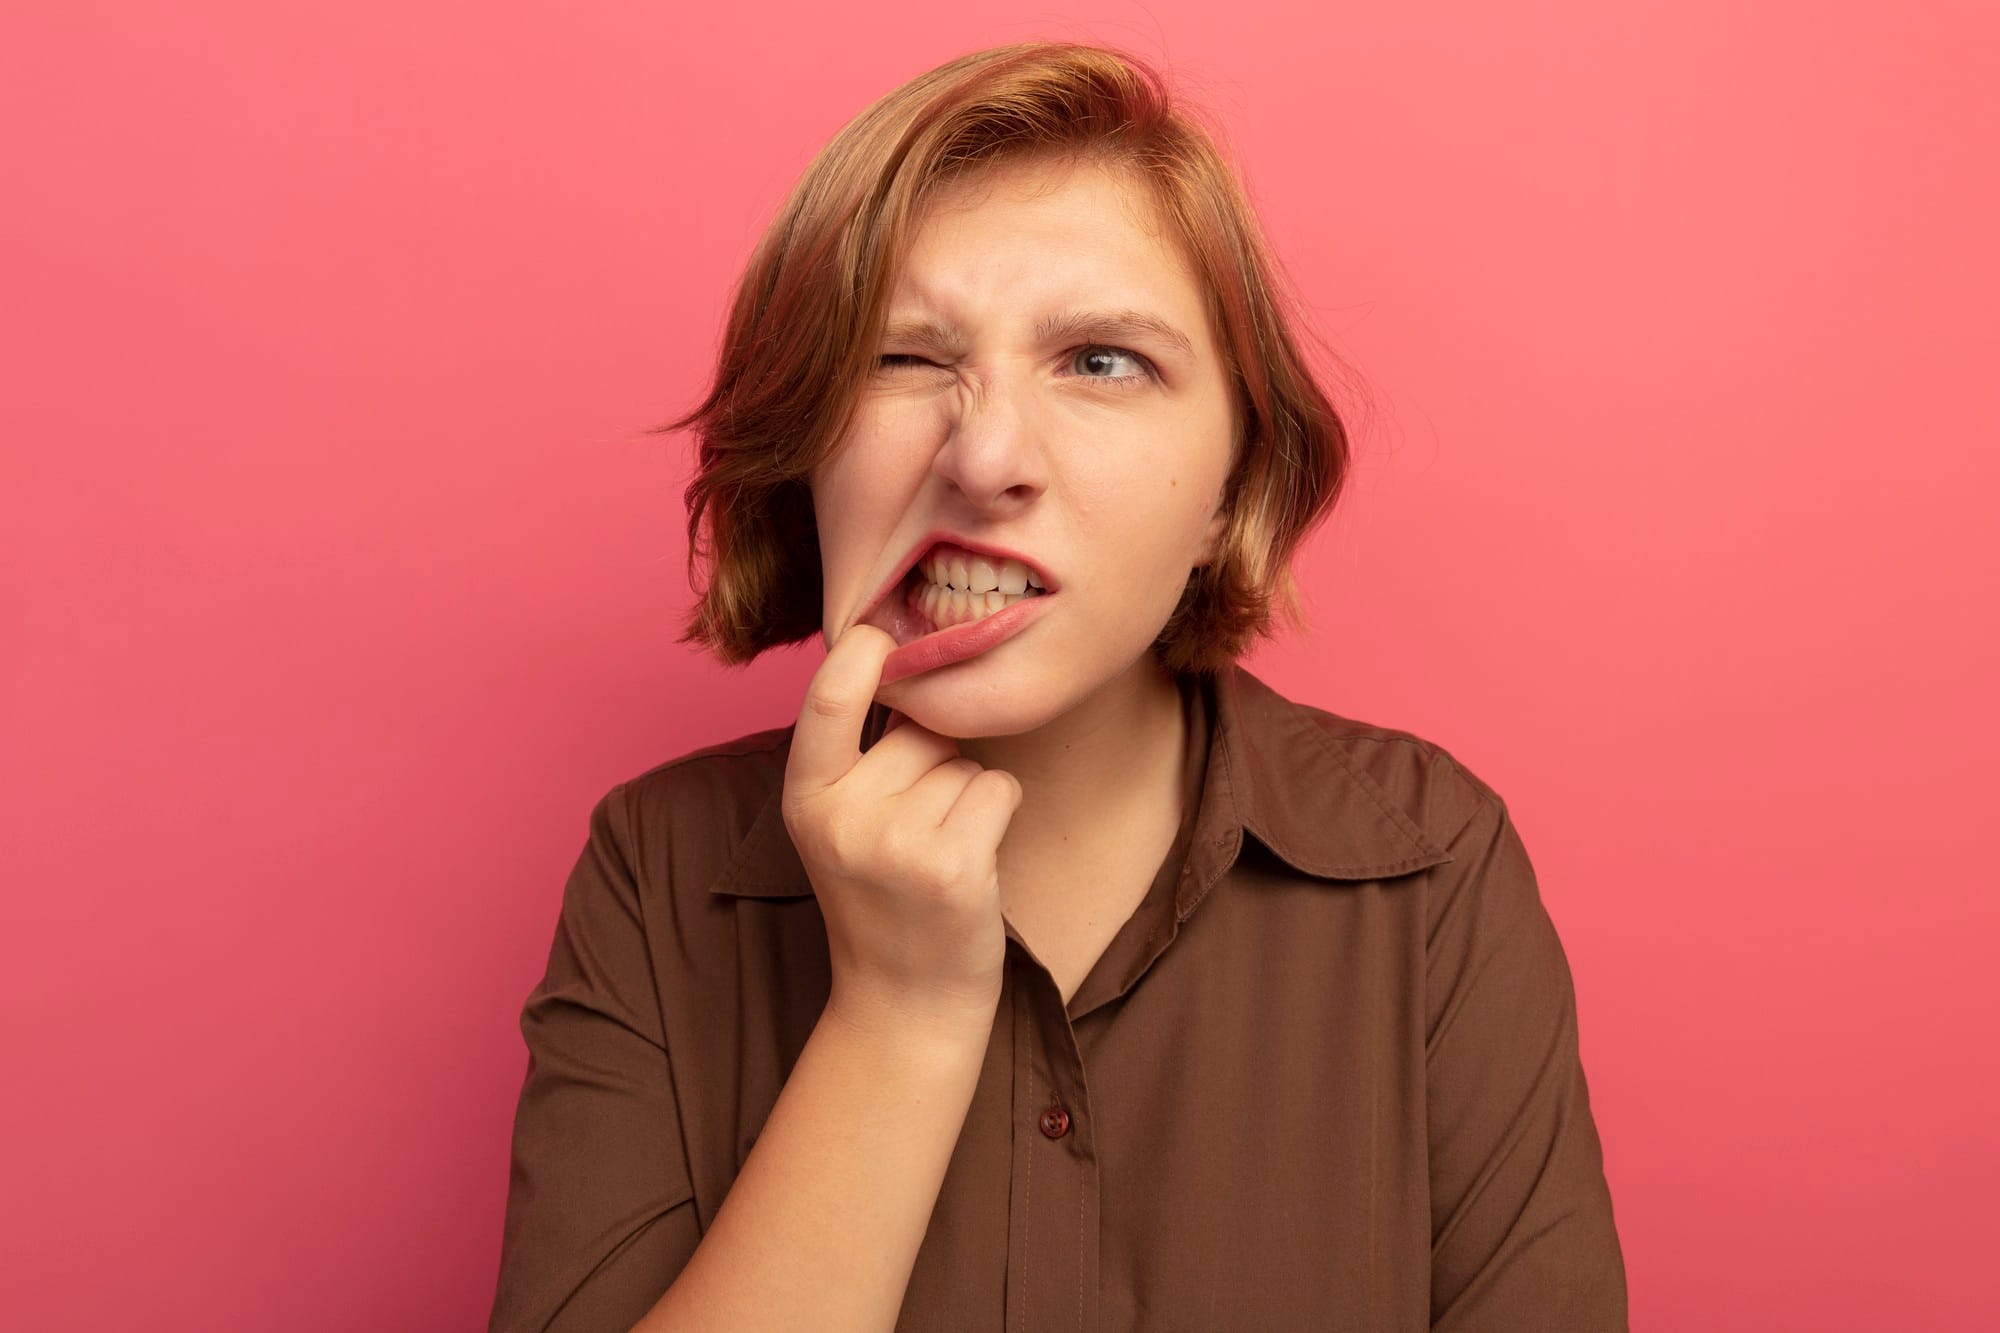 Mouth ulcers: Causes, Symptoms, and Treatment